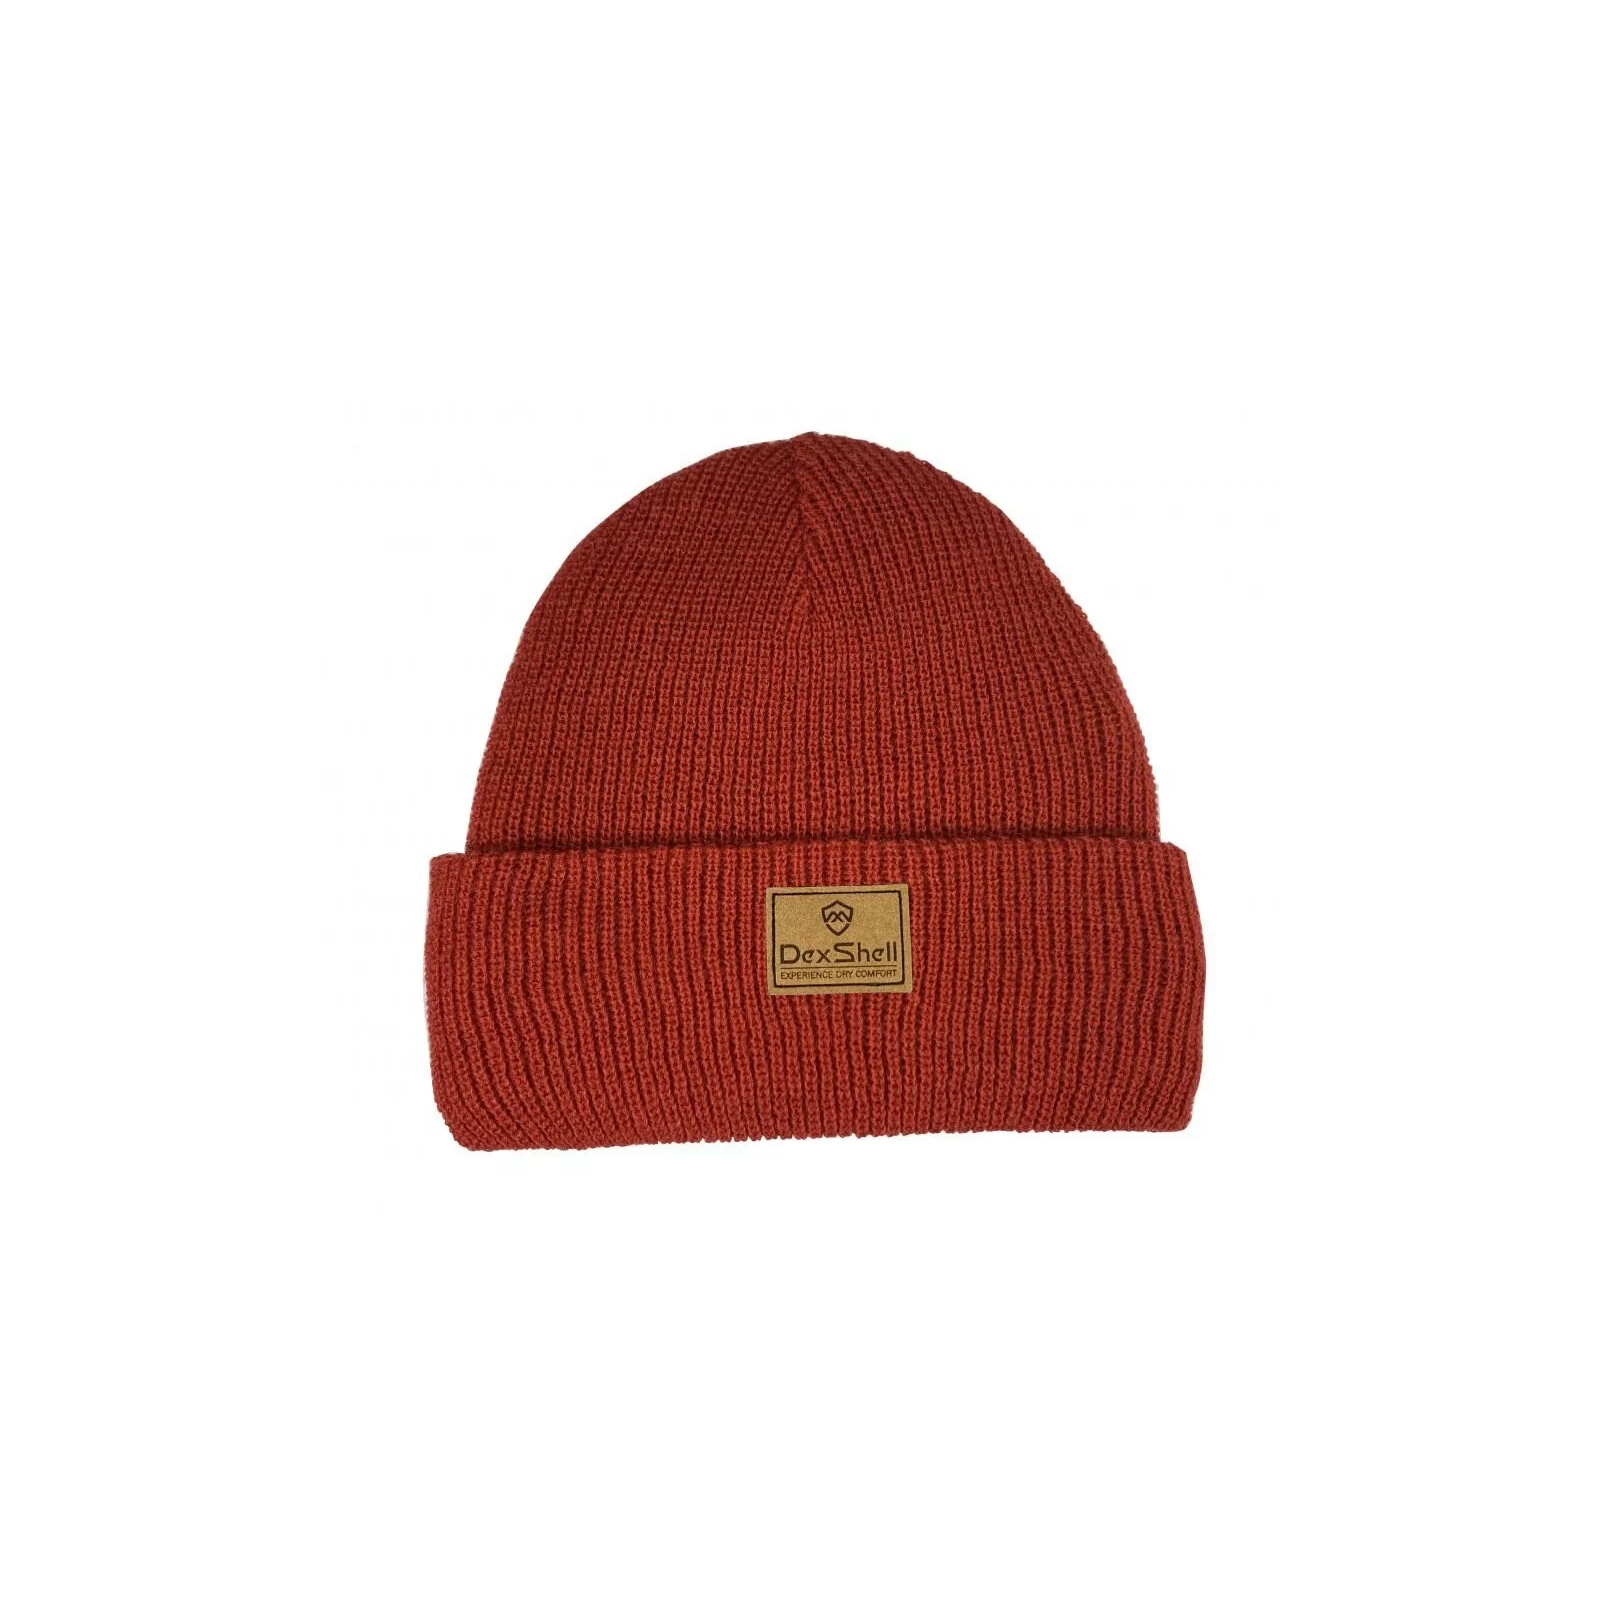 Водонепроницаемая шапка Dexshell Watch Beanie Red (DH322RED) изображение 2